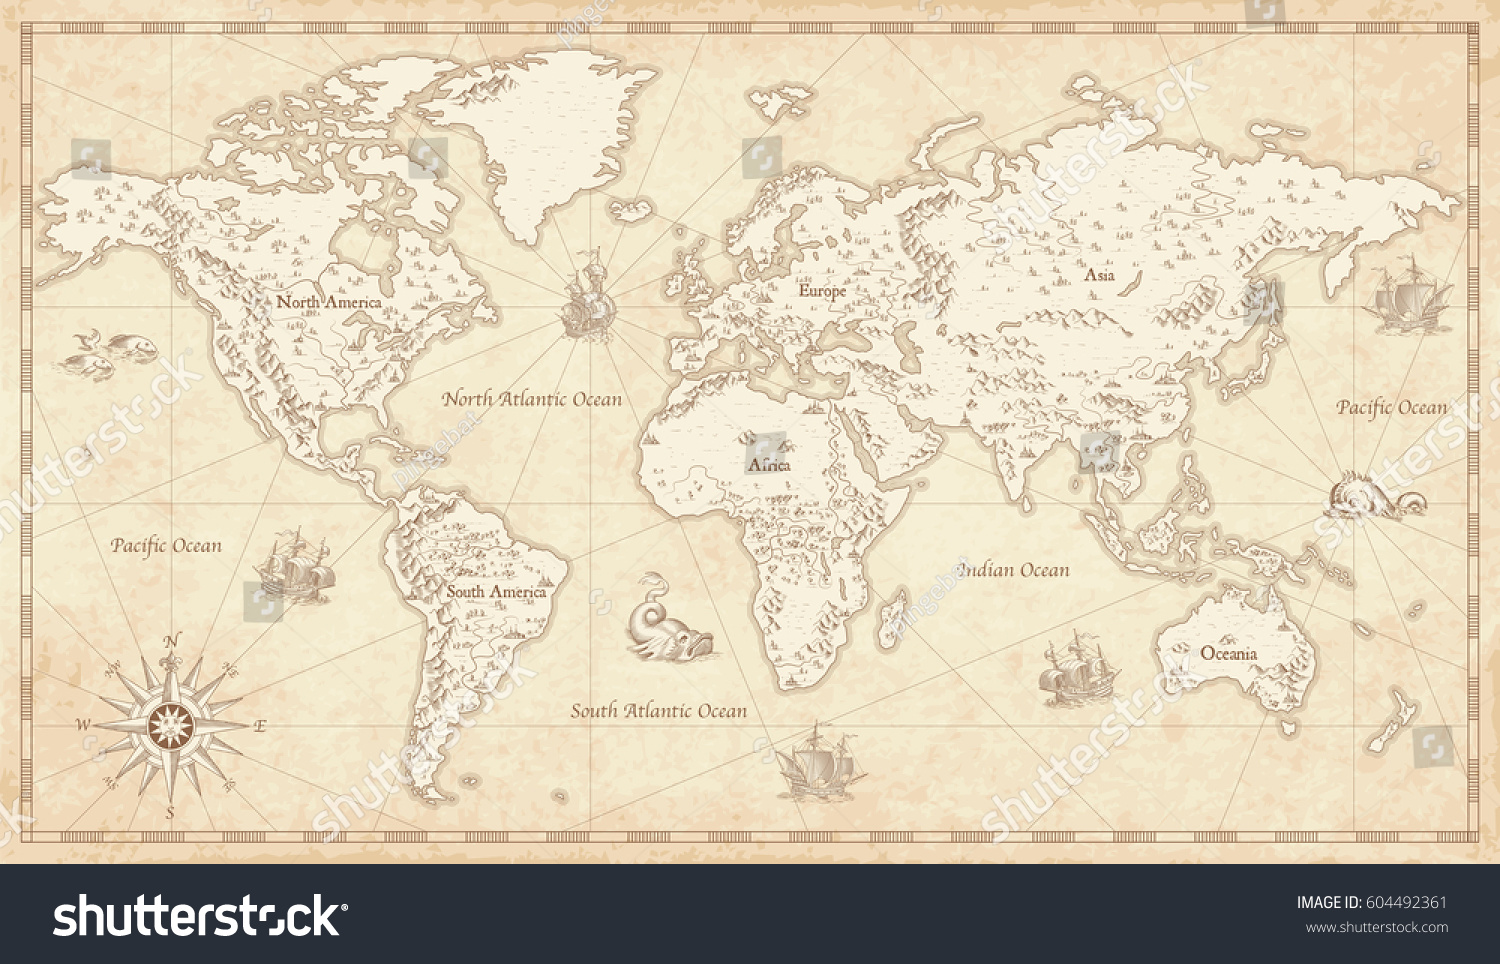 SVG of Great Detail Illustration of the world map in vintage style with mountains, trees, cities and main rivers on a old parchment background.  svg